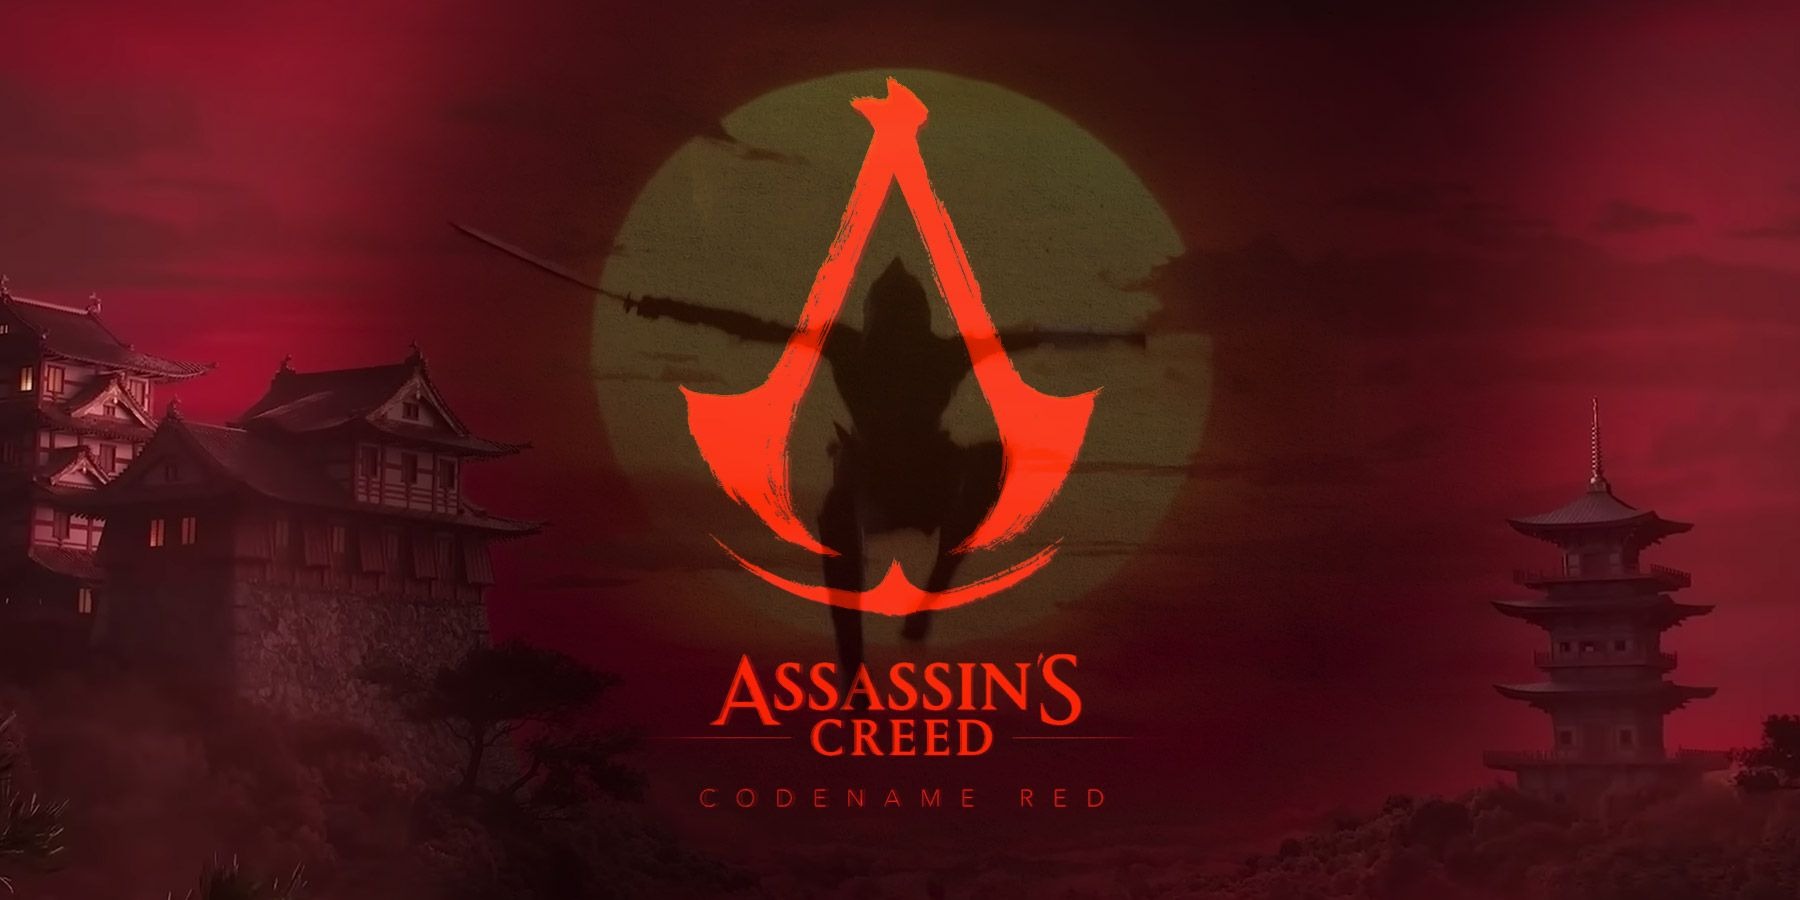 Assassins creed red дата. Ассасин Крид ред. Assassin's Creed Red главный герой. Assassin's Creed Codename Red. Assassin's Creed: Codename Red (2024).